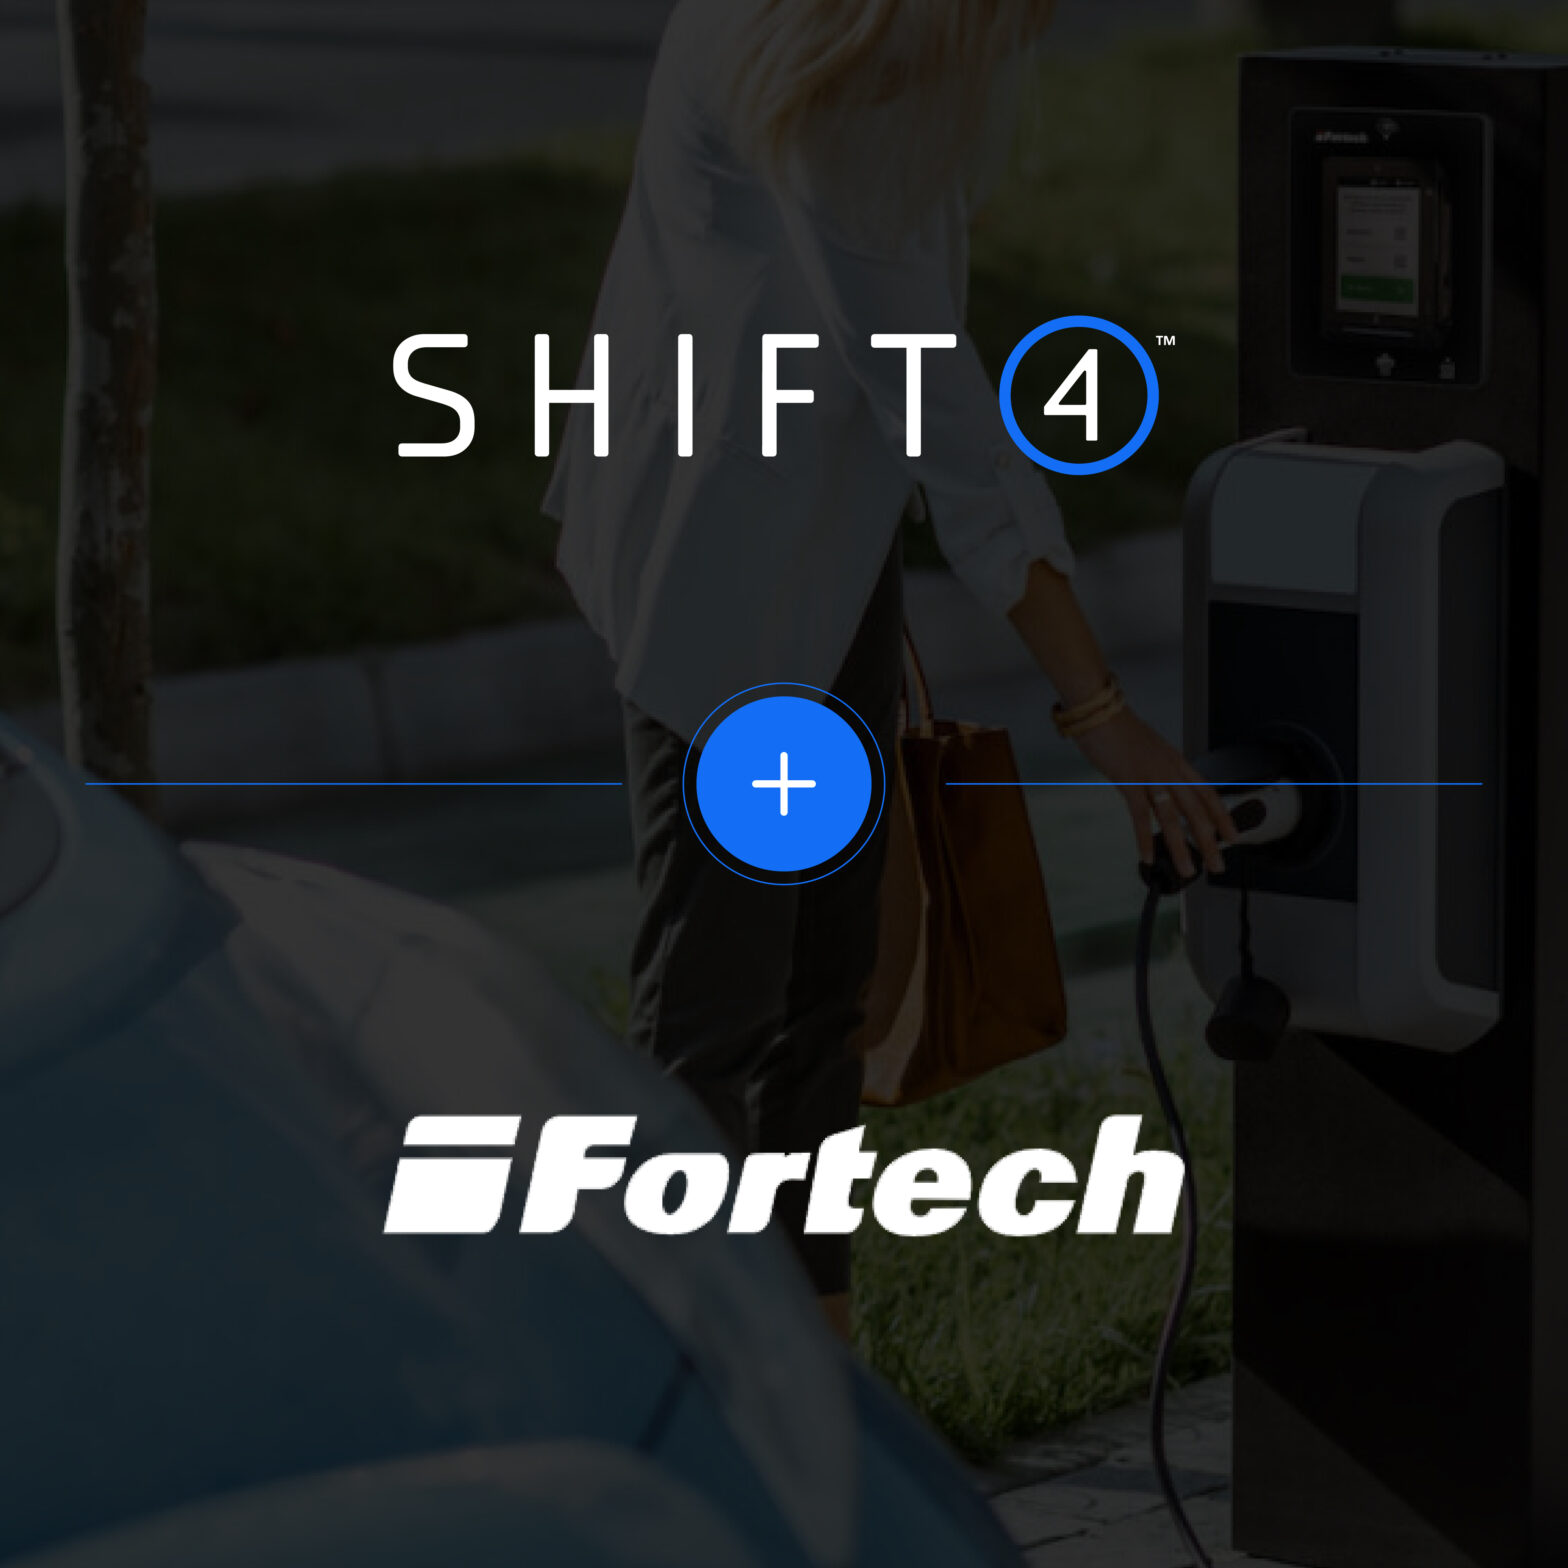 Shift4 and Fortech logos